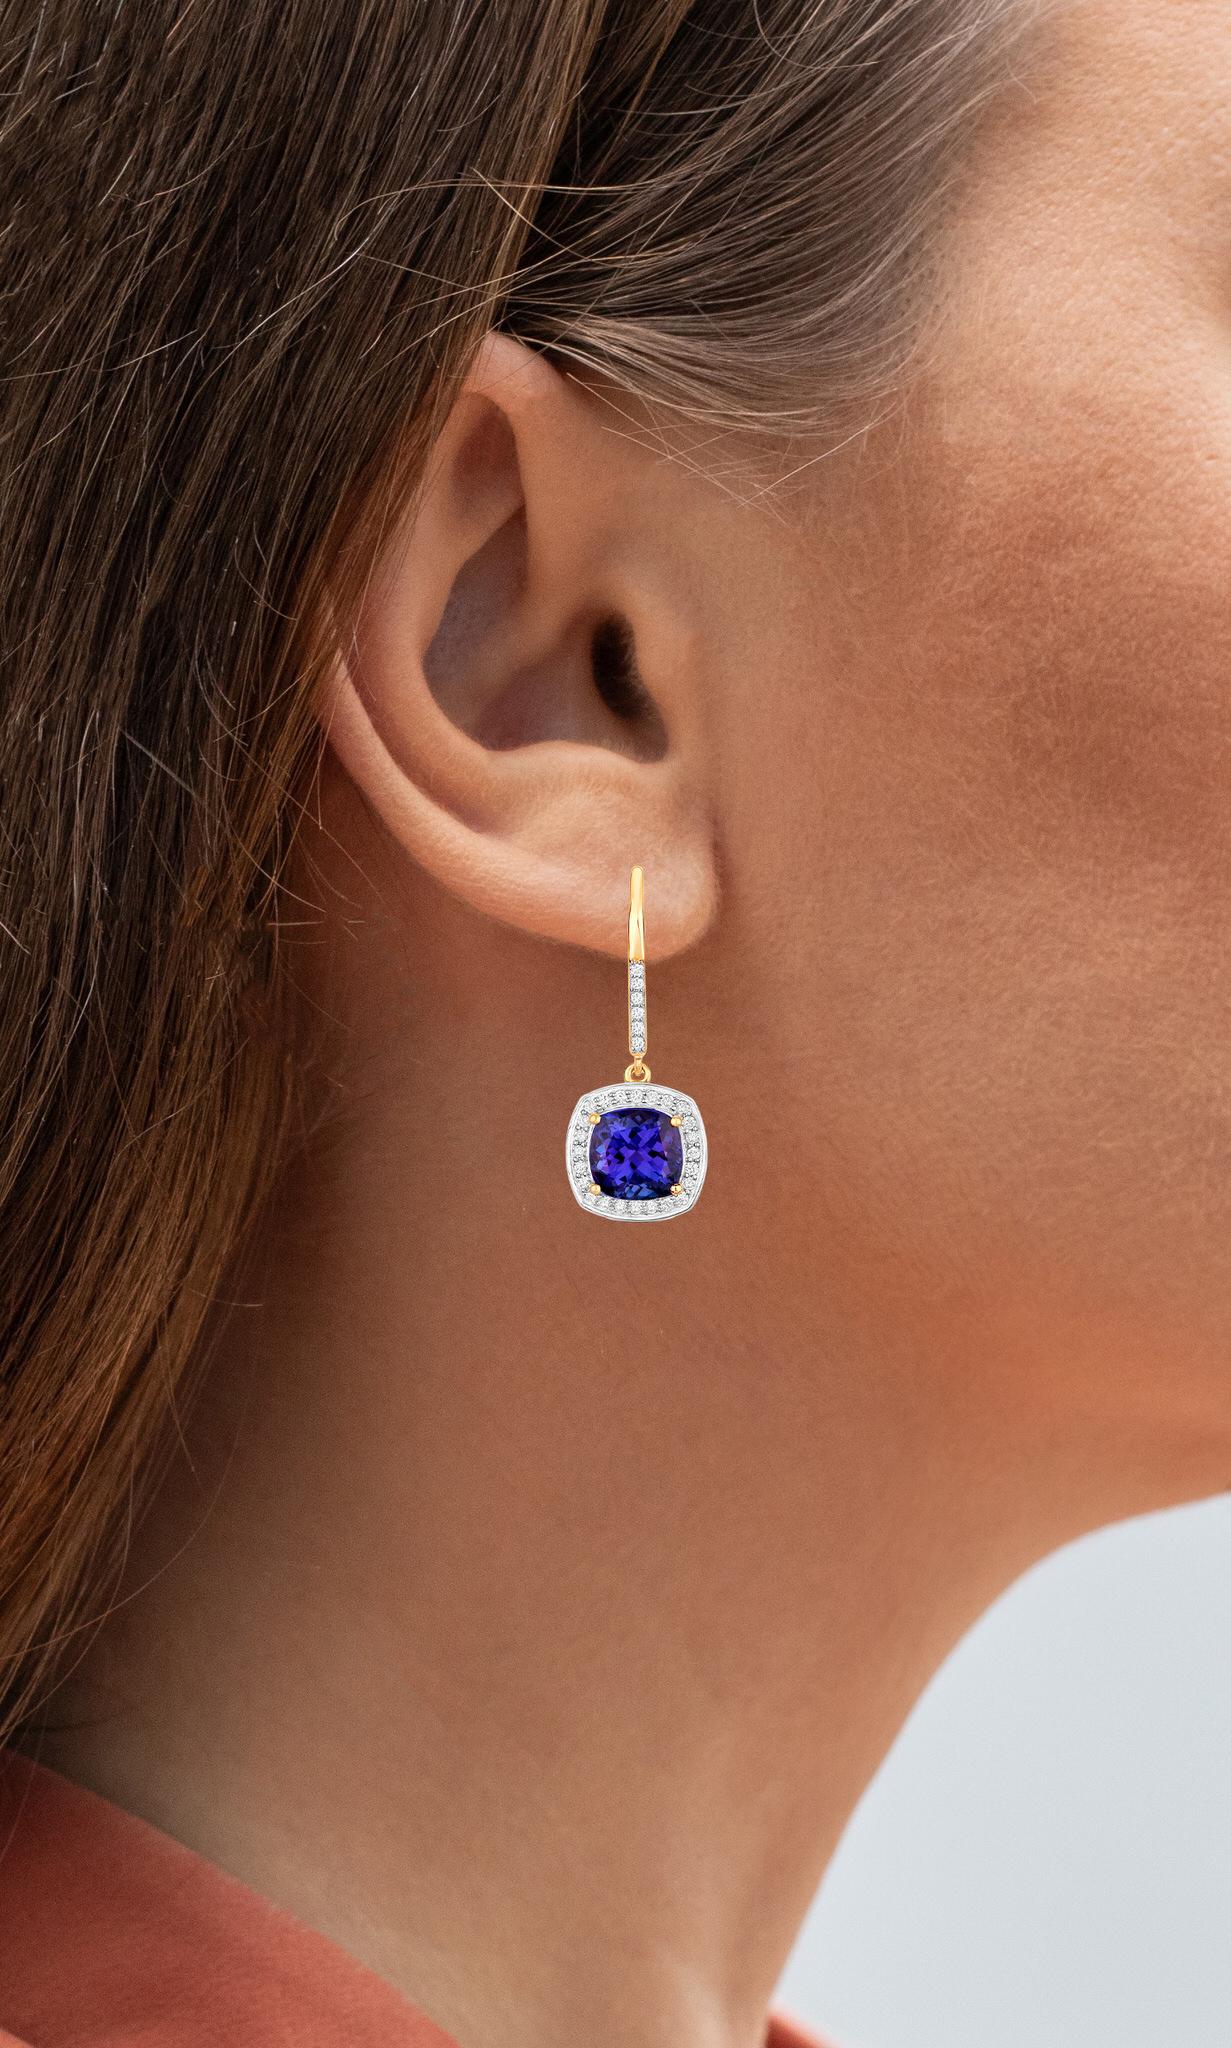 It comes with the Gemological Appraisal by GIA GG/AJP
All Gemstones are Natural
2 Cushion Tanzanite = 5.50 Carats
60 Round Diamonds = 0.60 Carats
Metal: 14K Yellow Gold
Dimensions: 33 x 13 mm